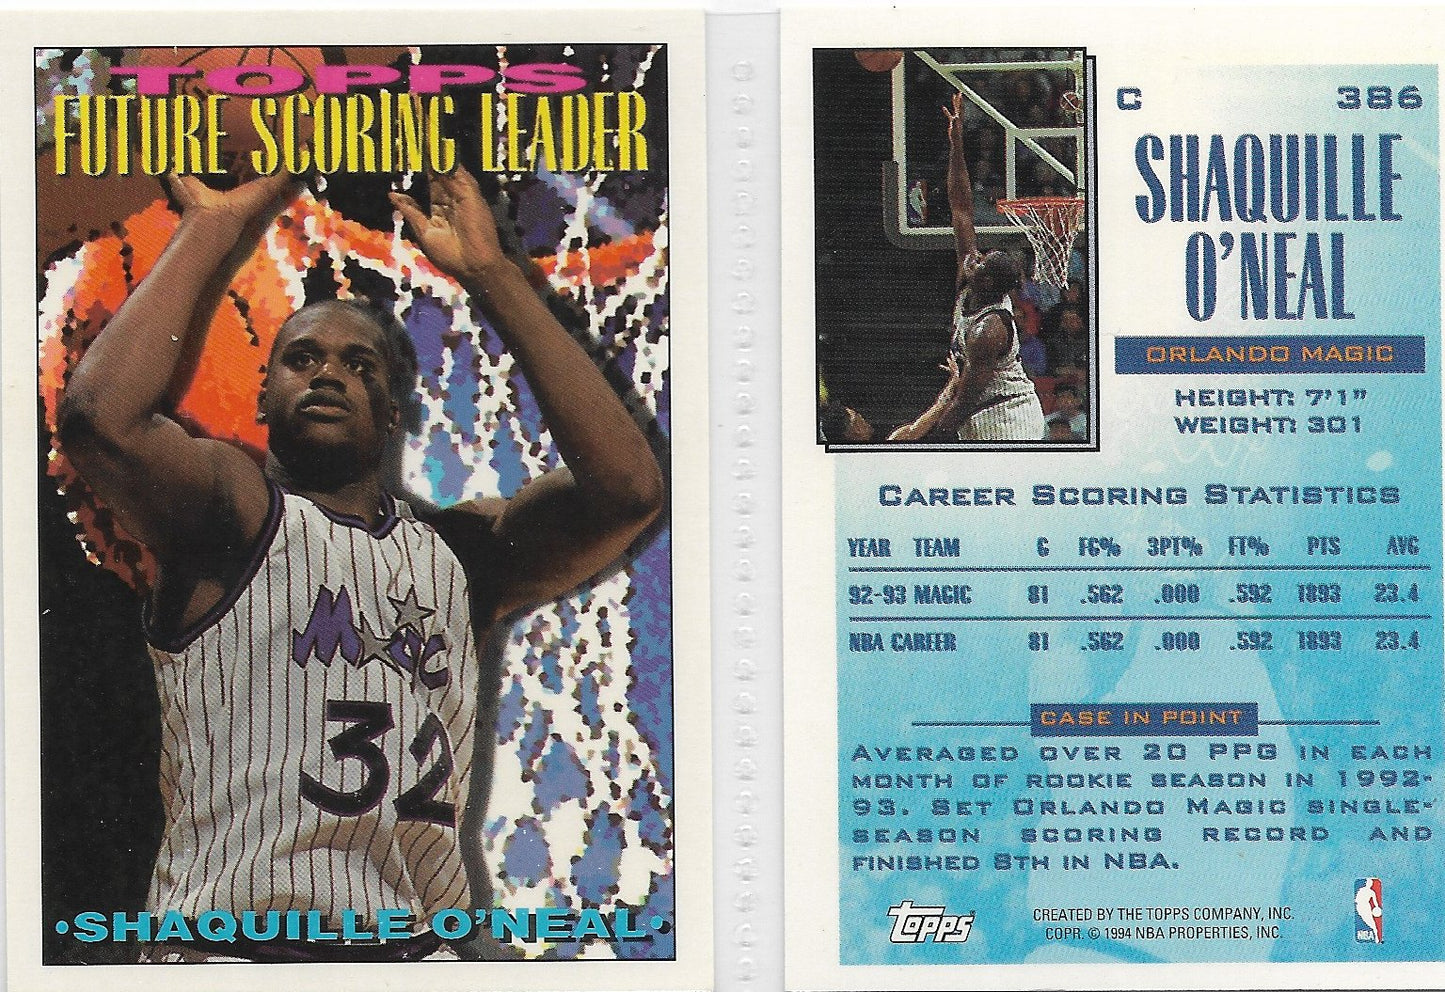 1993 TOPPS CARD #386 SHAQUILLE O'NEAL FUTURE SCORING LEADER